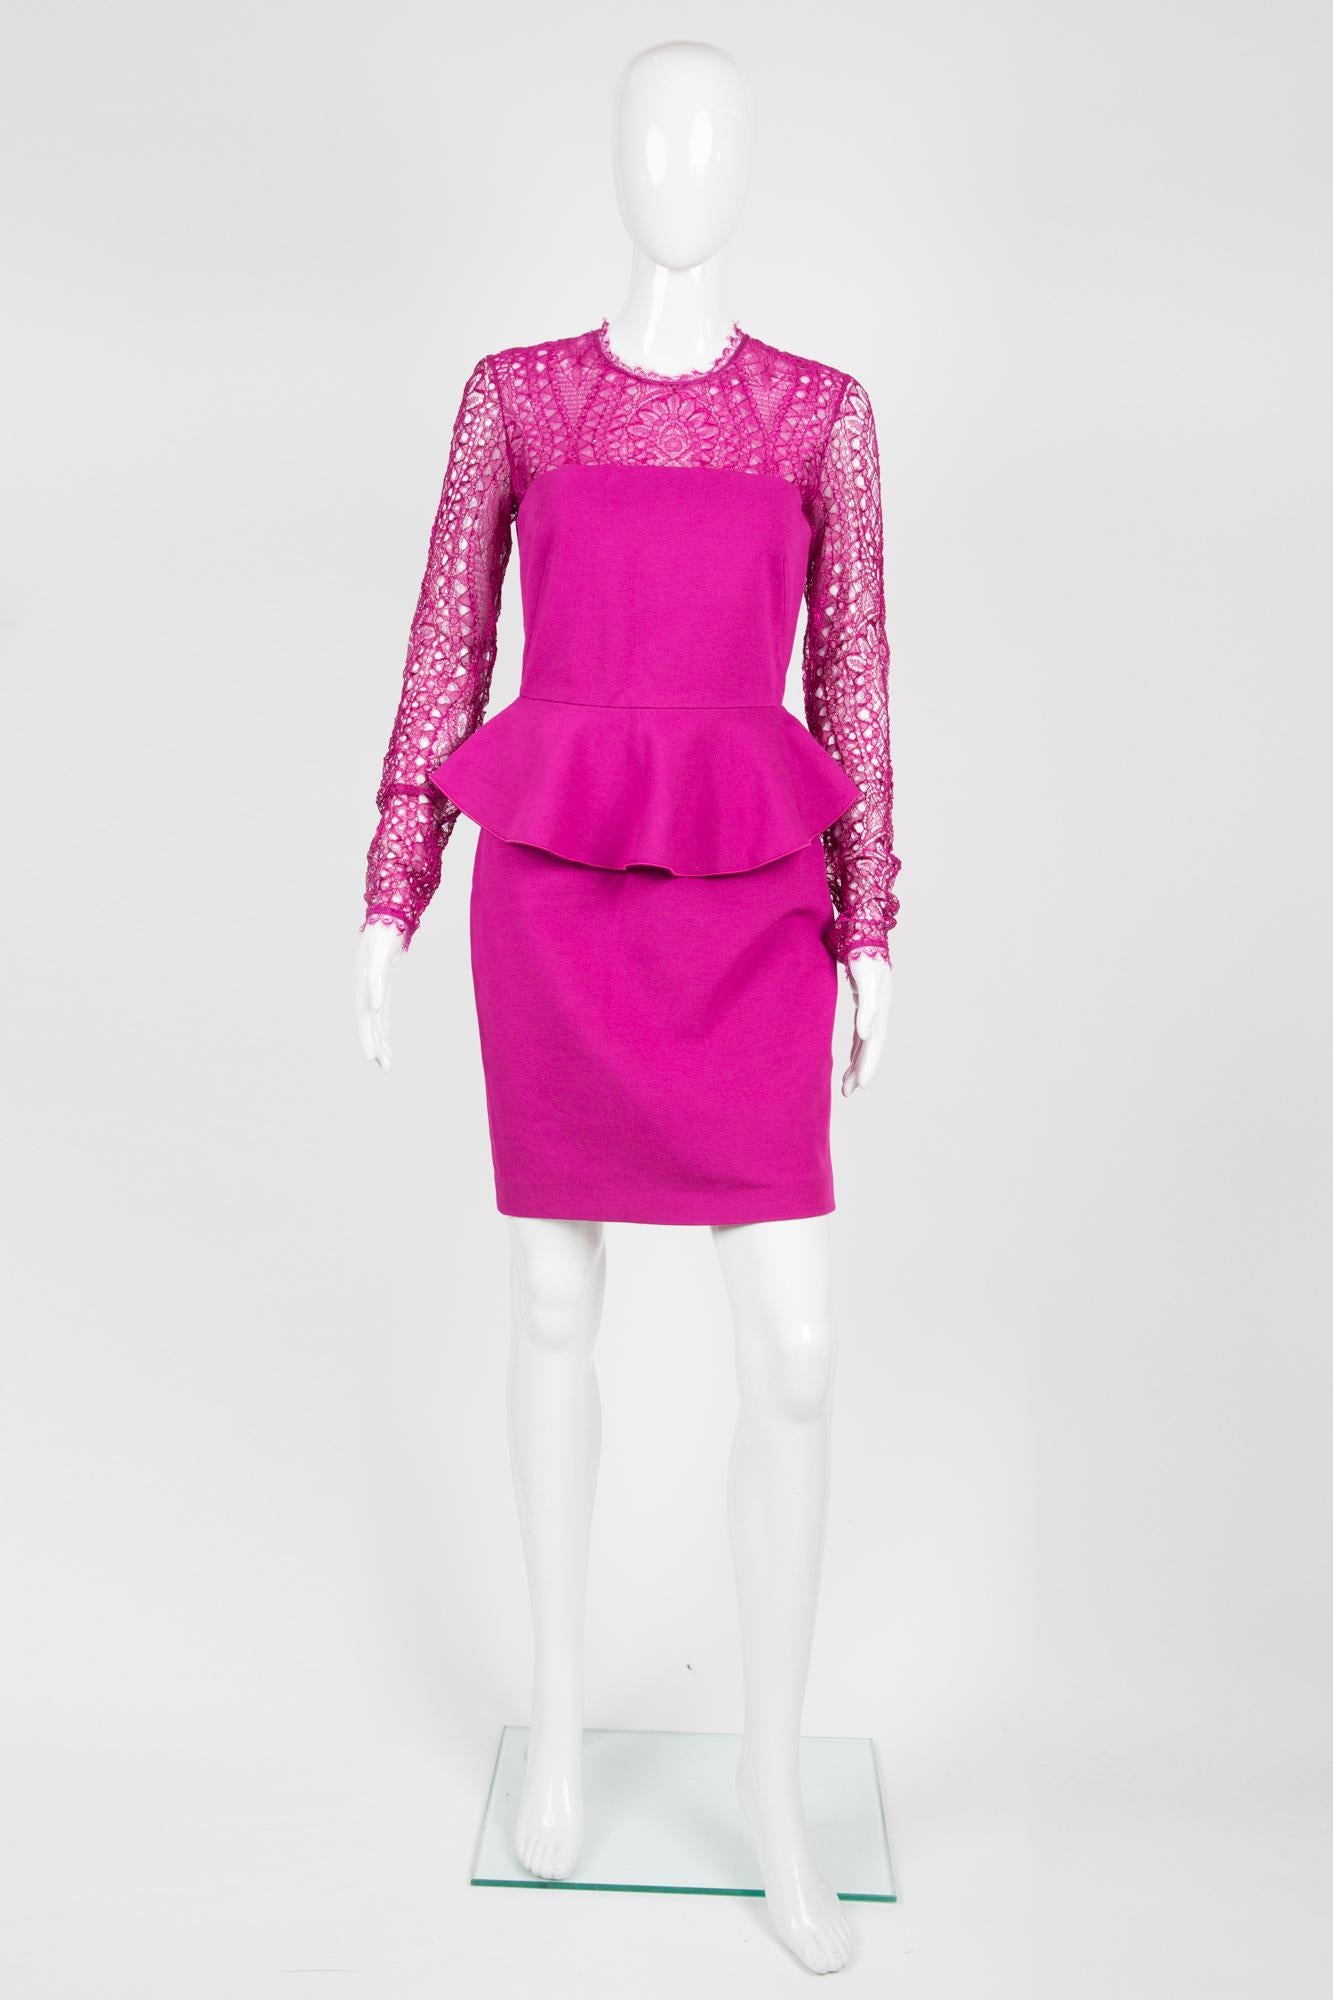 Emilio Pucci pink peplum dress featuring a lace yoke extending to the long sleeves, a stretch material, a peplum detail and a back zipper. 
Composition: 85%viscose, 11% polyamide, 4% elastan
Lace: 75% viscose, 25% polyamide
In excellent vintage